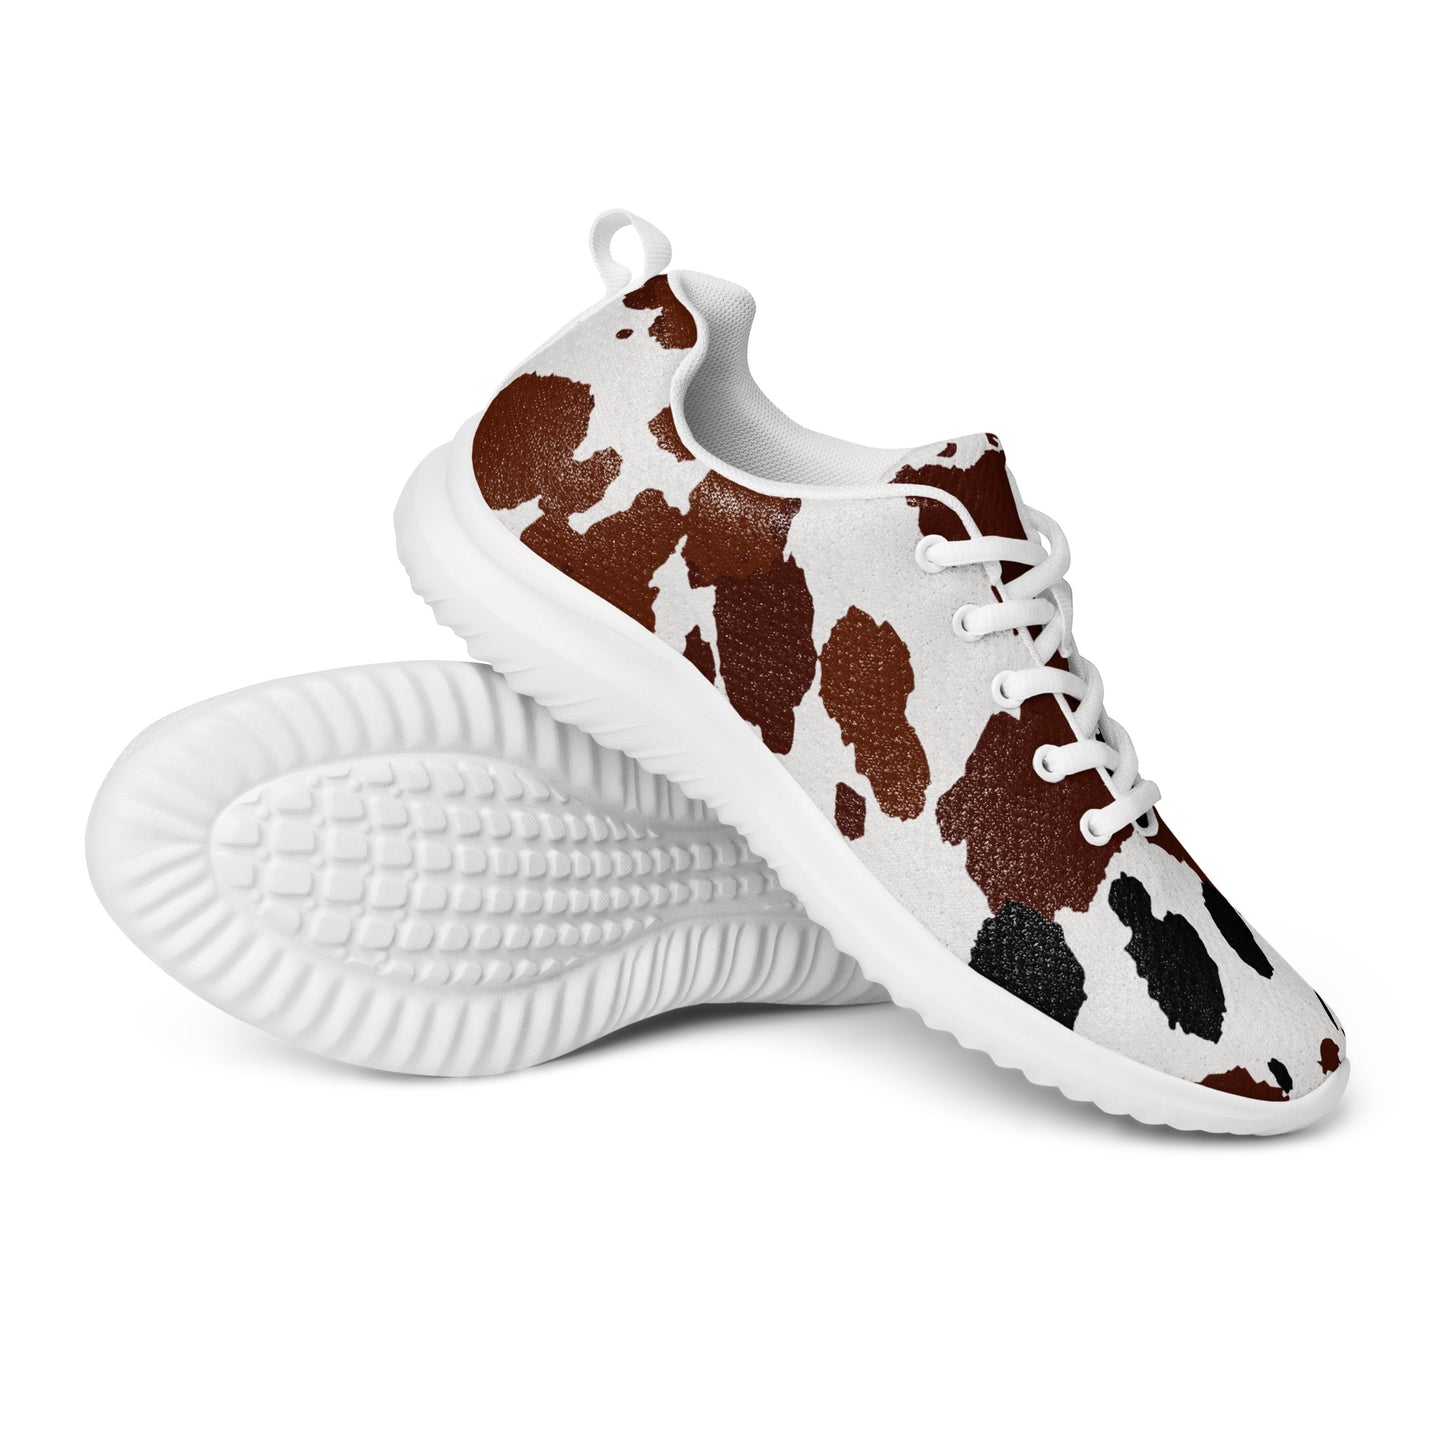 Cow Hide Western Themed Women’s athletic shoes